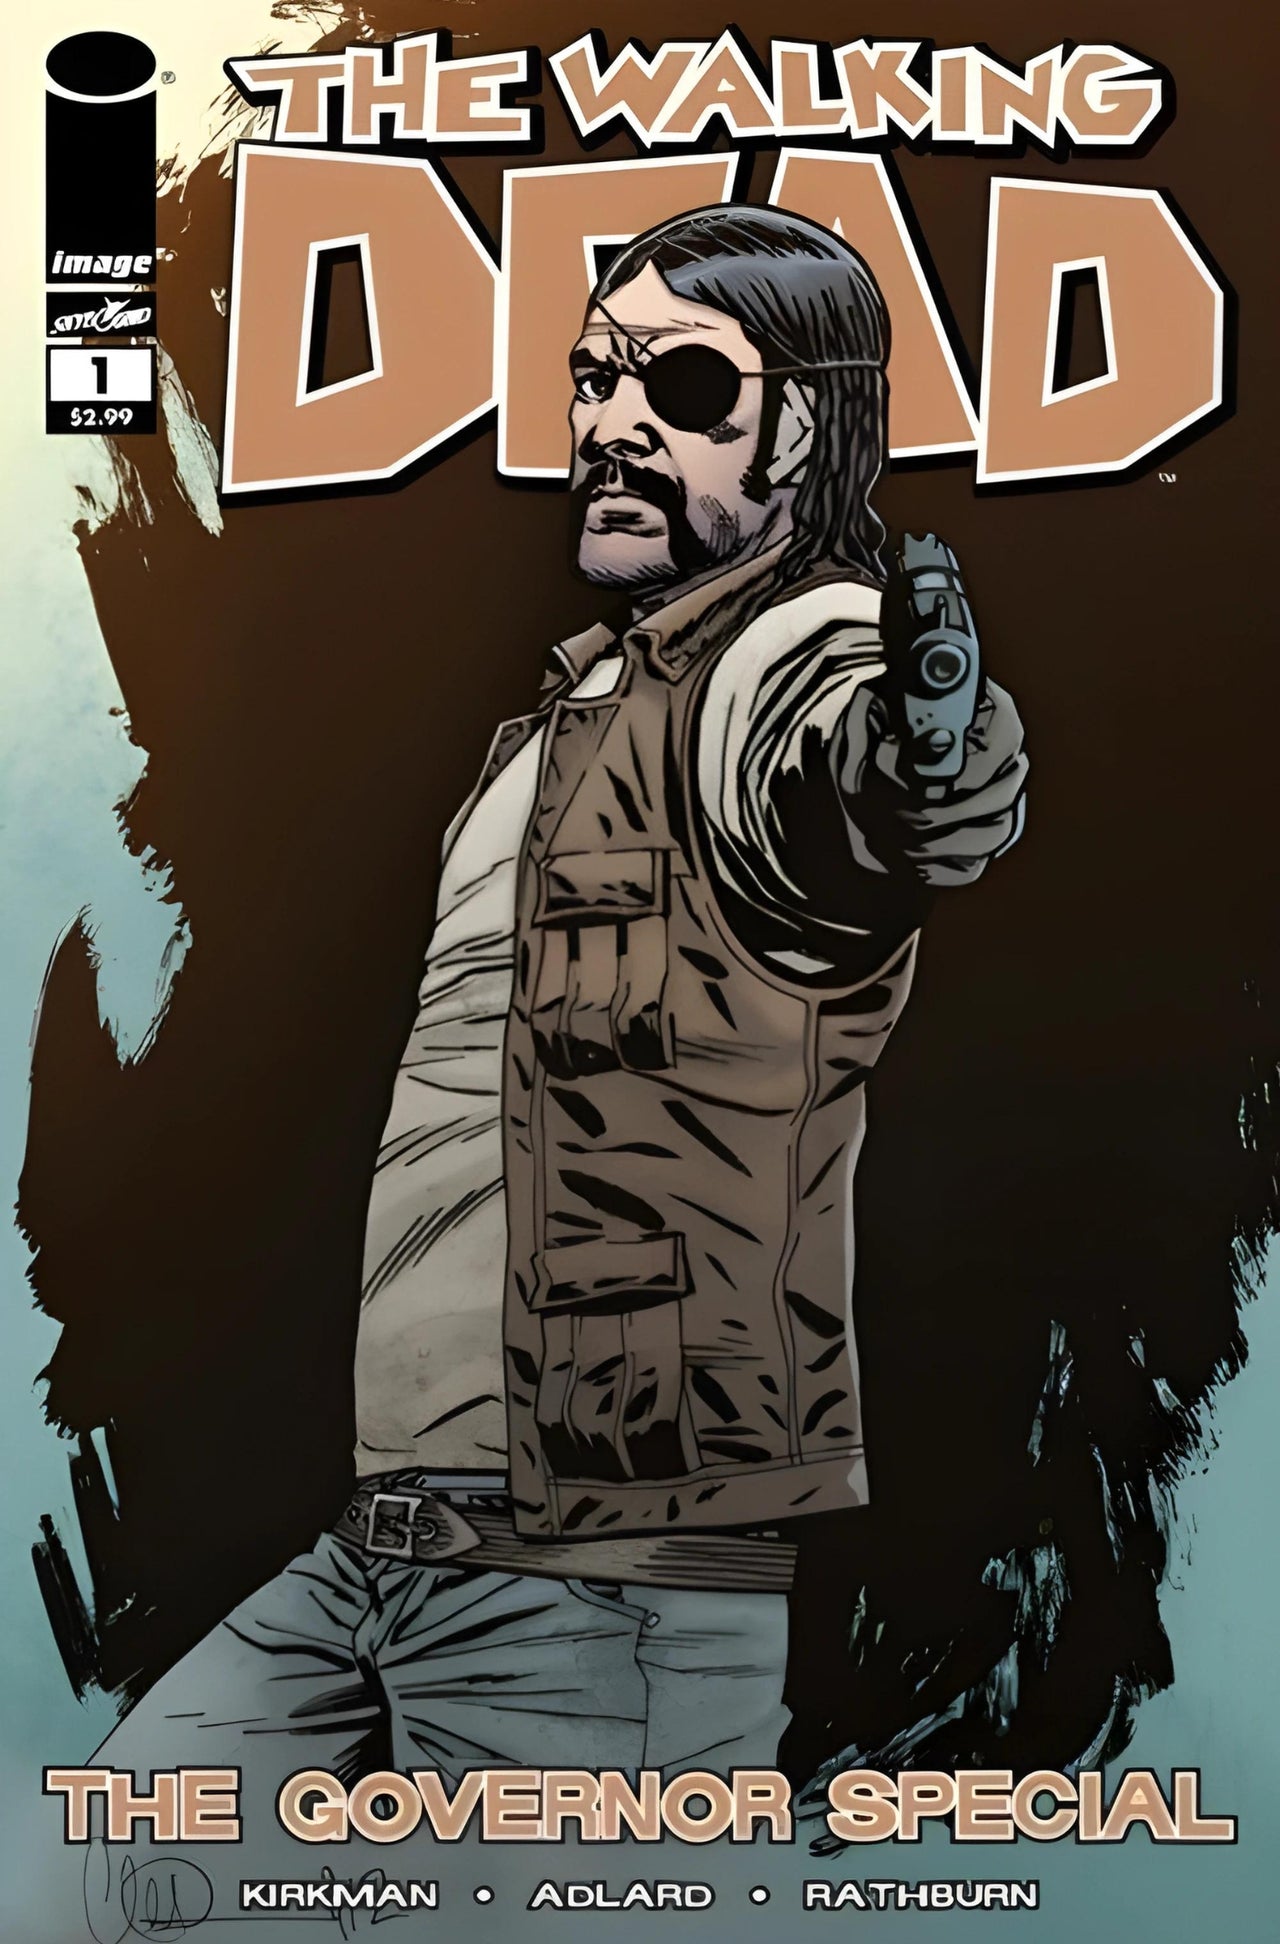 The Walking Dead: The Governor Special (2013) #1